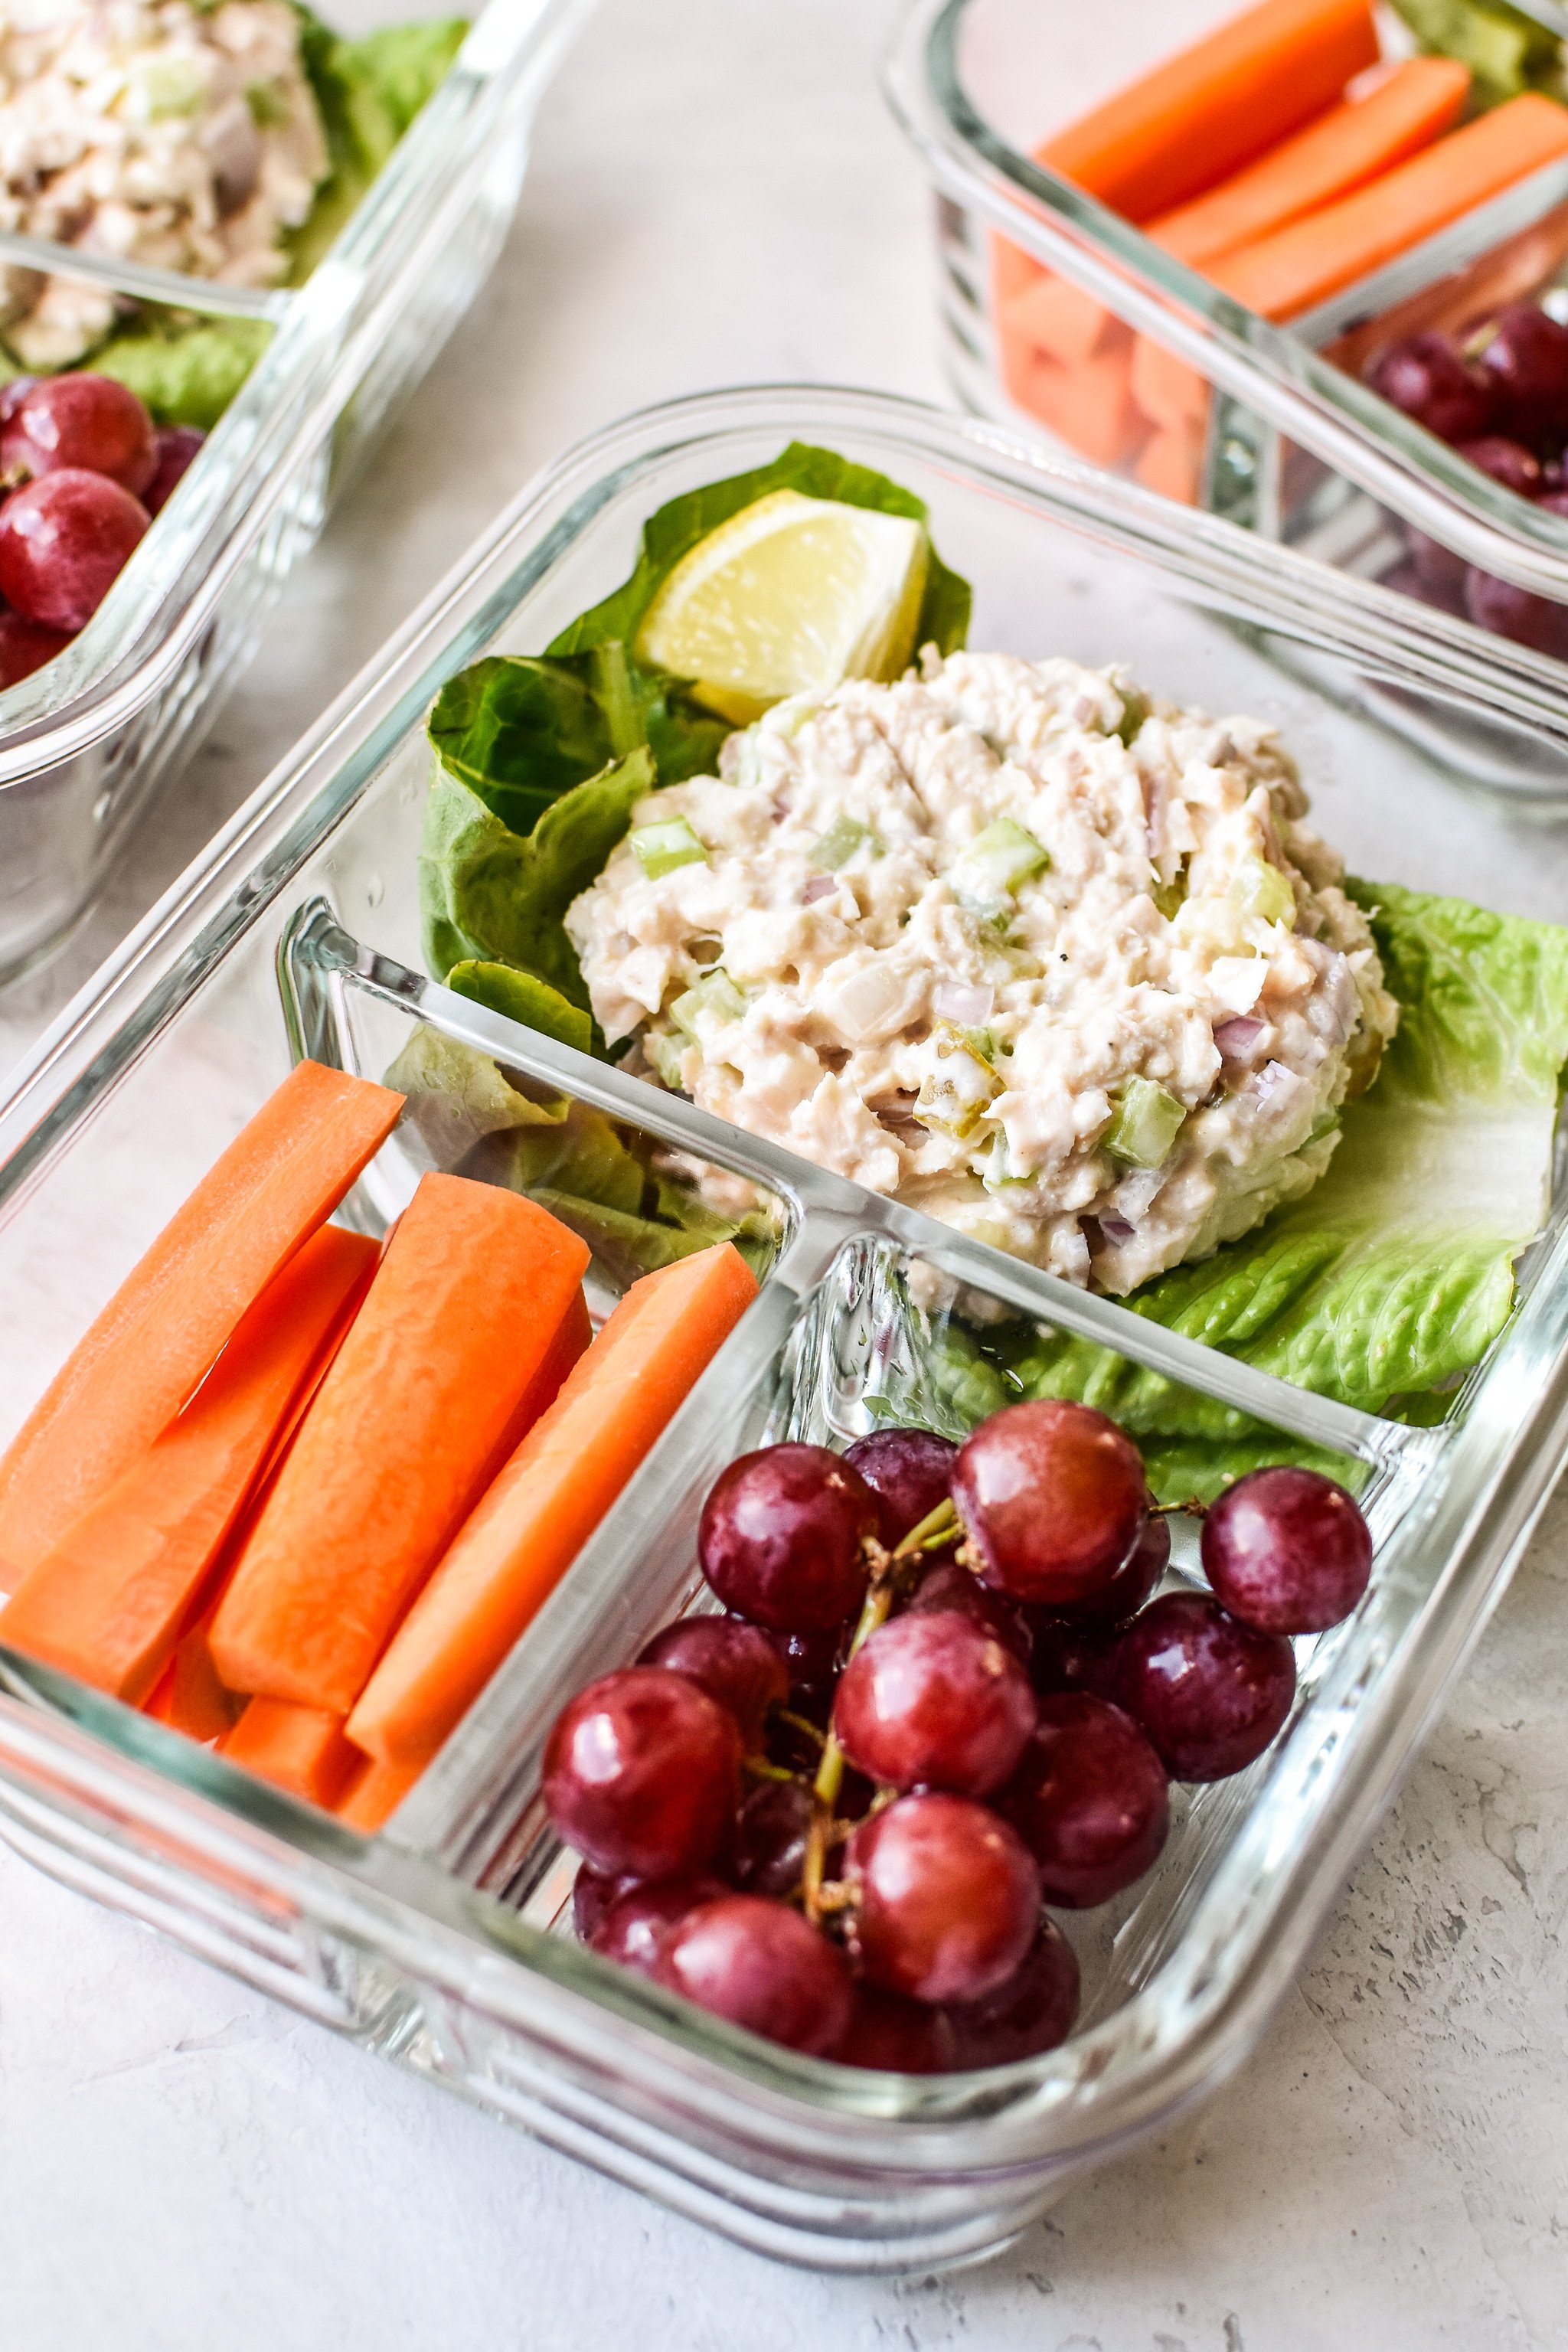 Low carb tuna salad meal prep lunch with carrots and grapes.